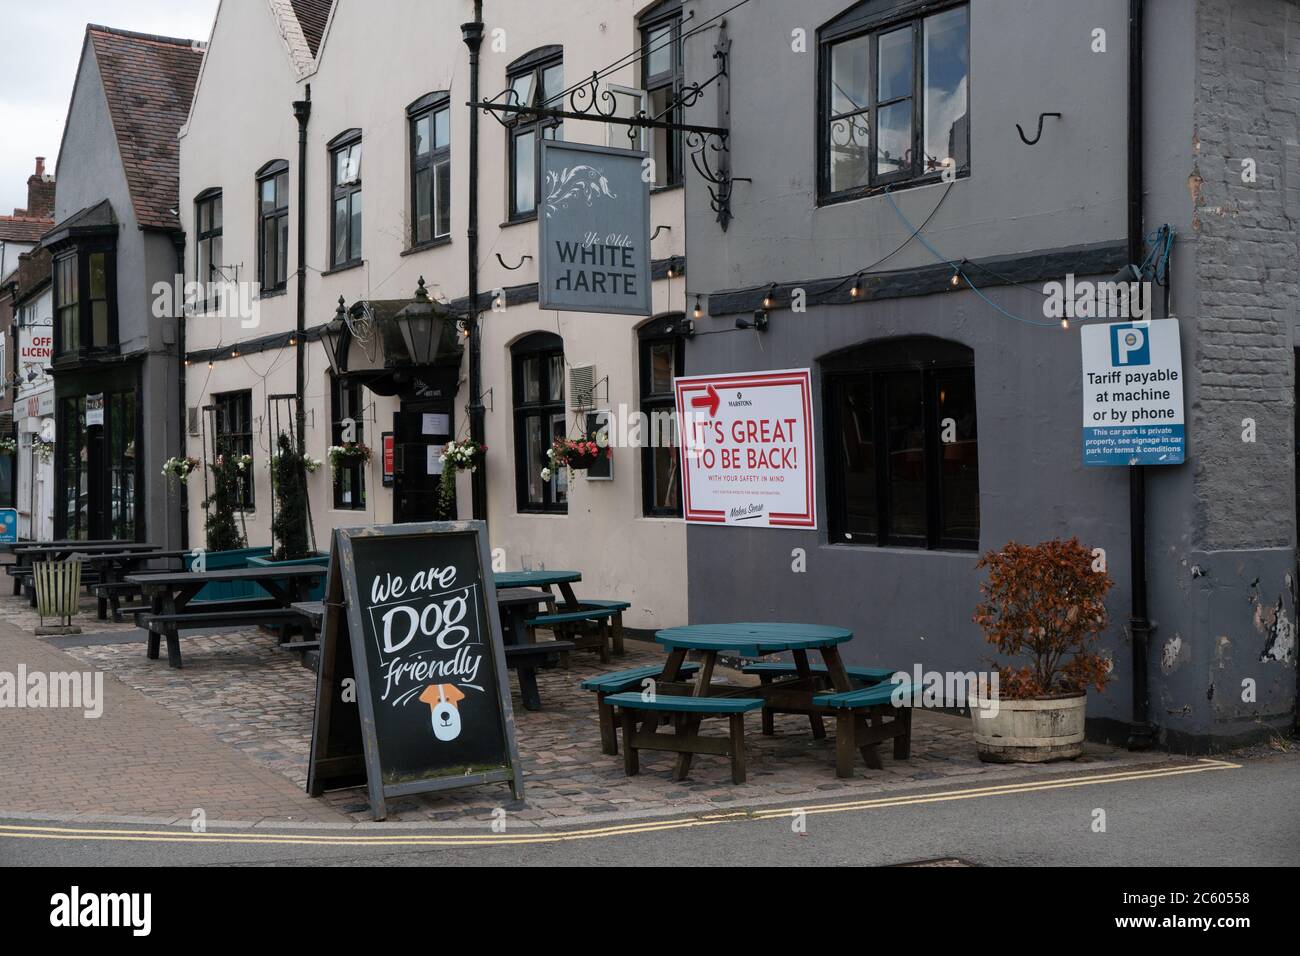 It's Great To Be Back sign on outside wall of pub. Ye Olde White Harte. Kinver. July 5th 2020. Covid-19 Pandemic. UK Stock Photo